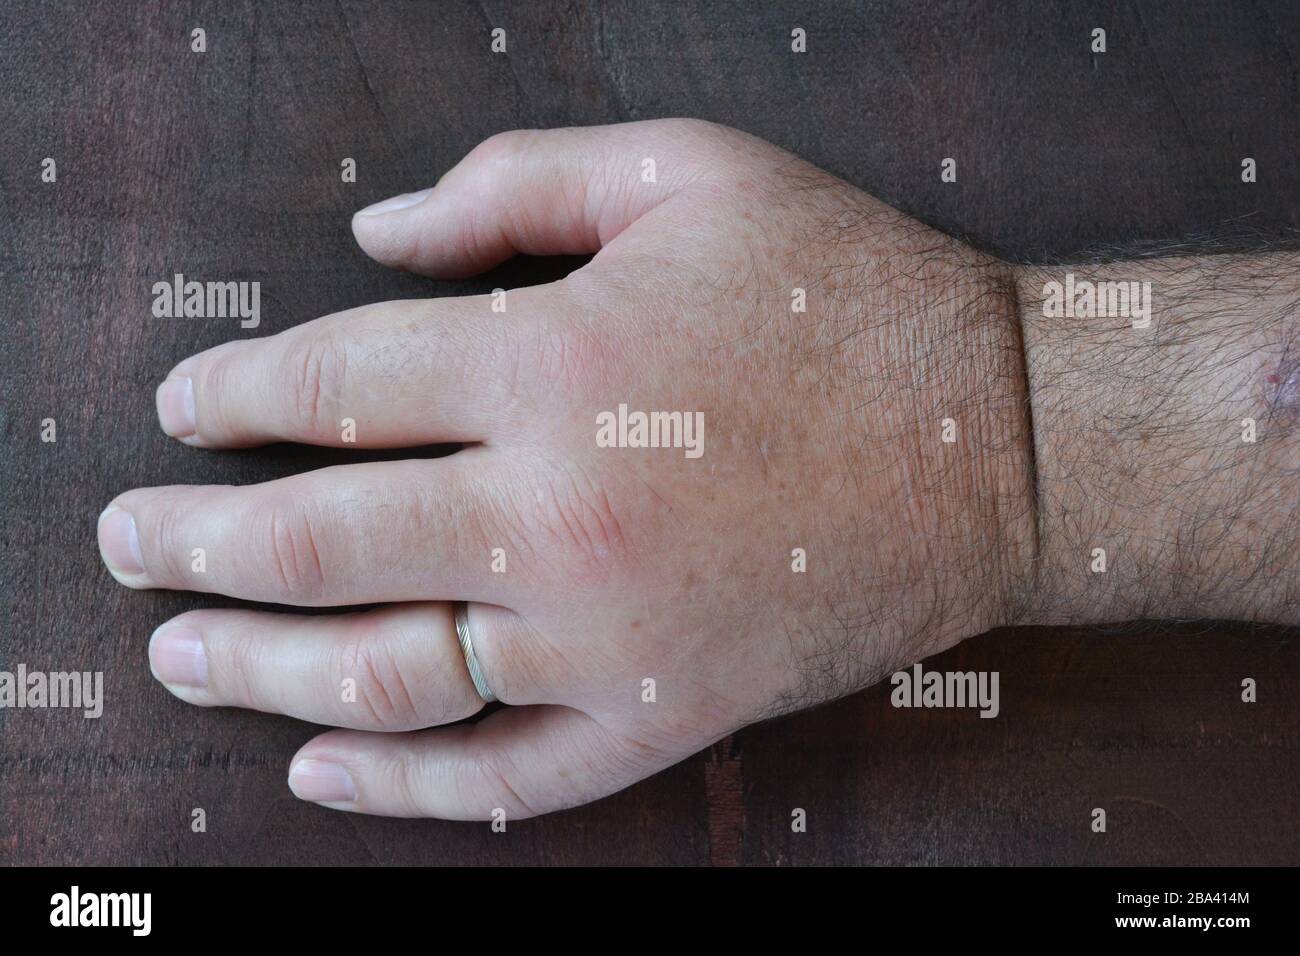 Swollen fist due to the sting of the wasp on dark wooden background, close up view Stock Photo